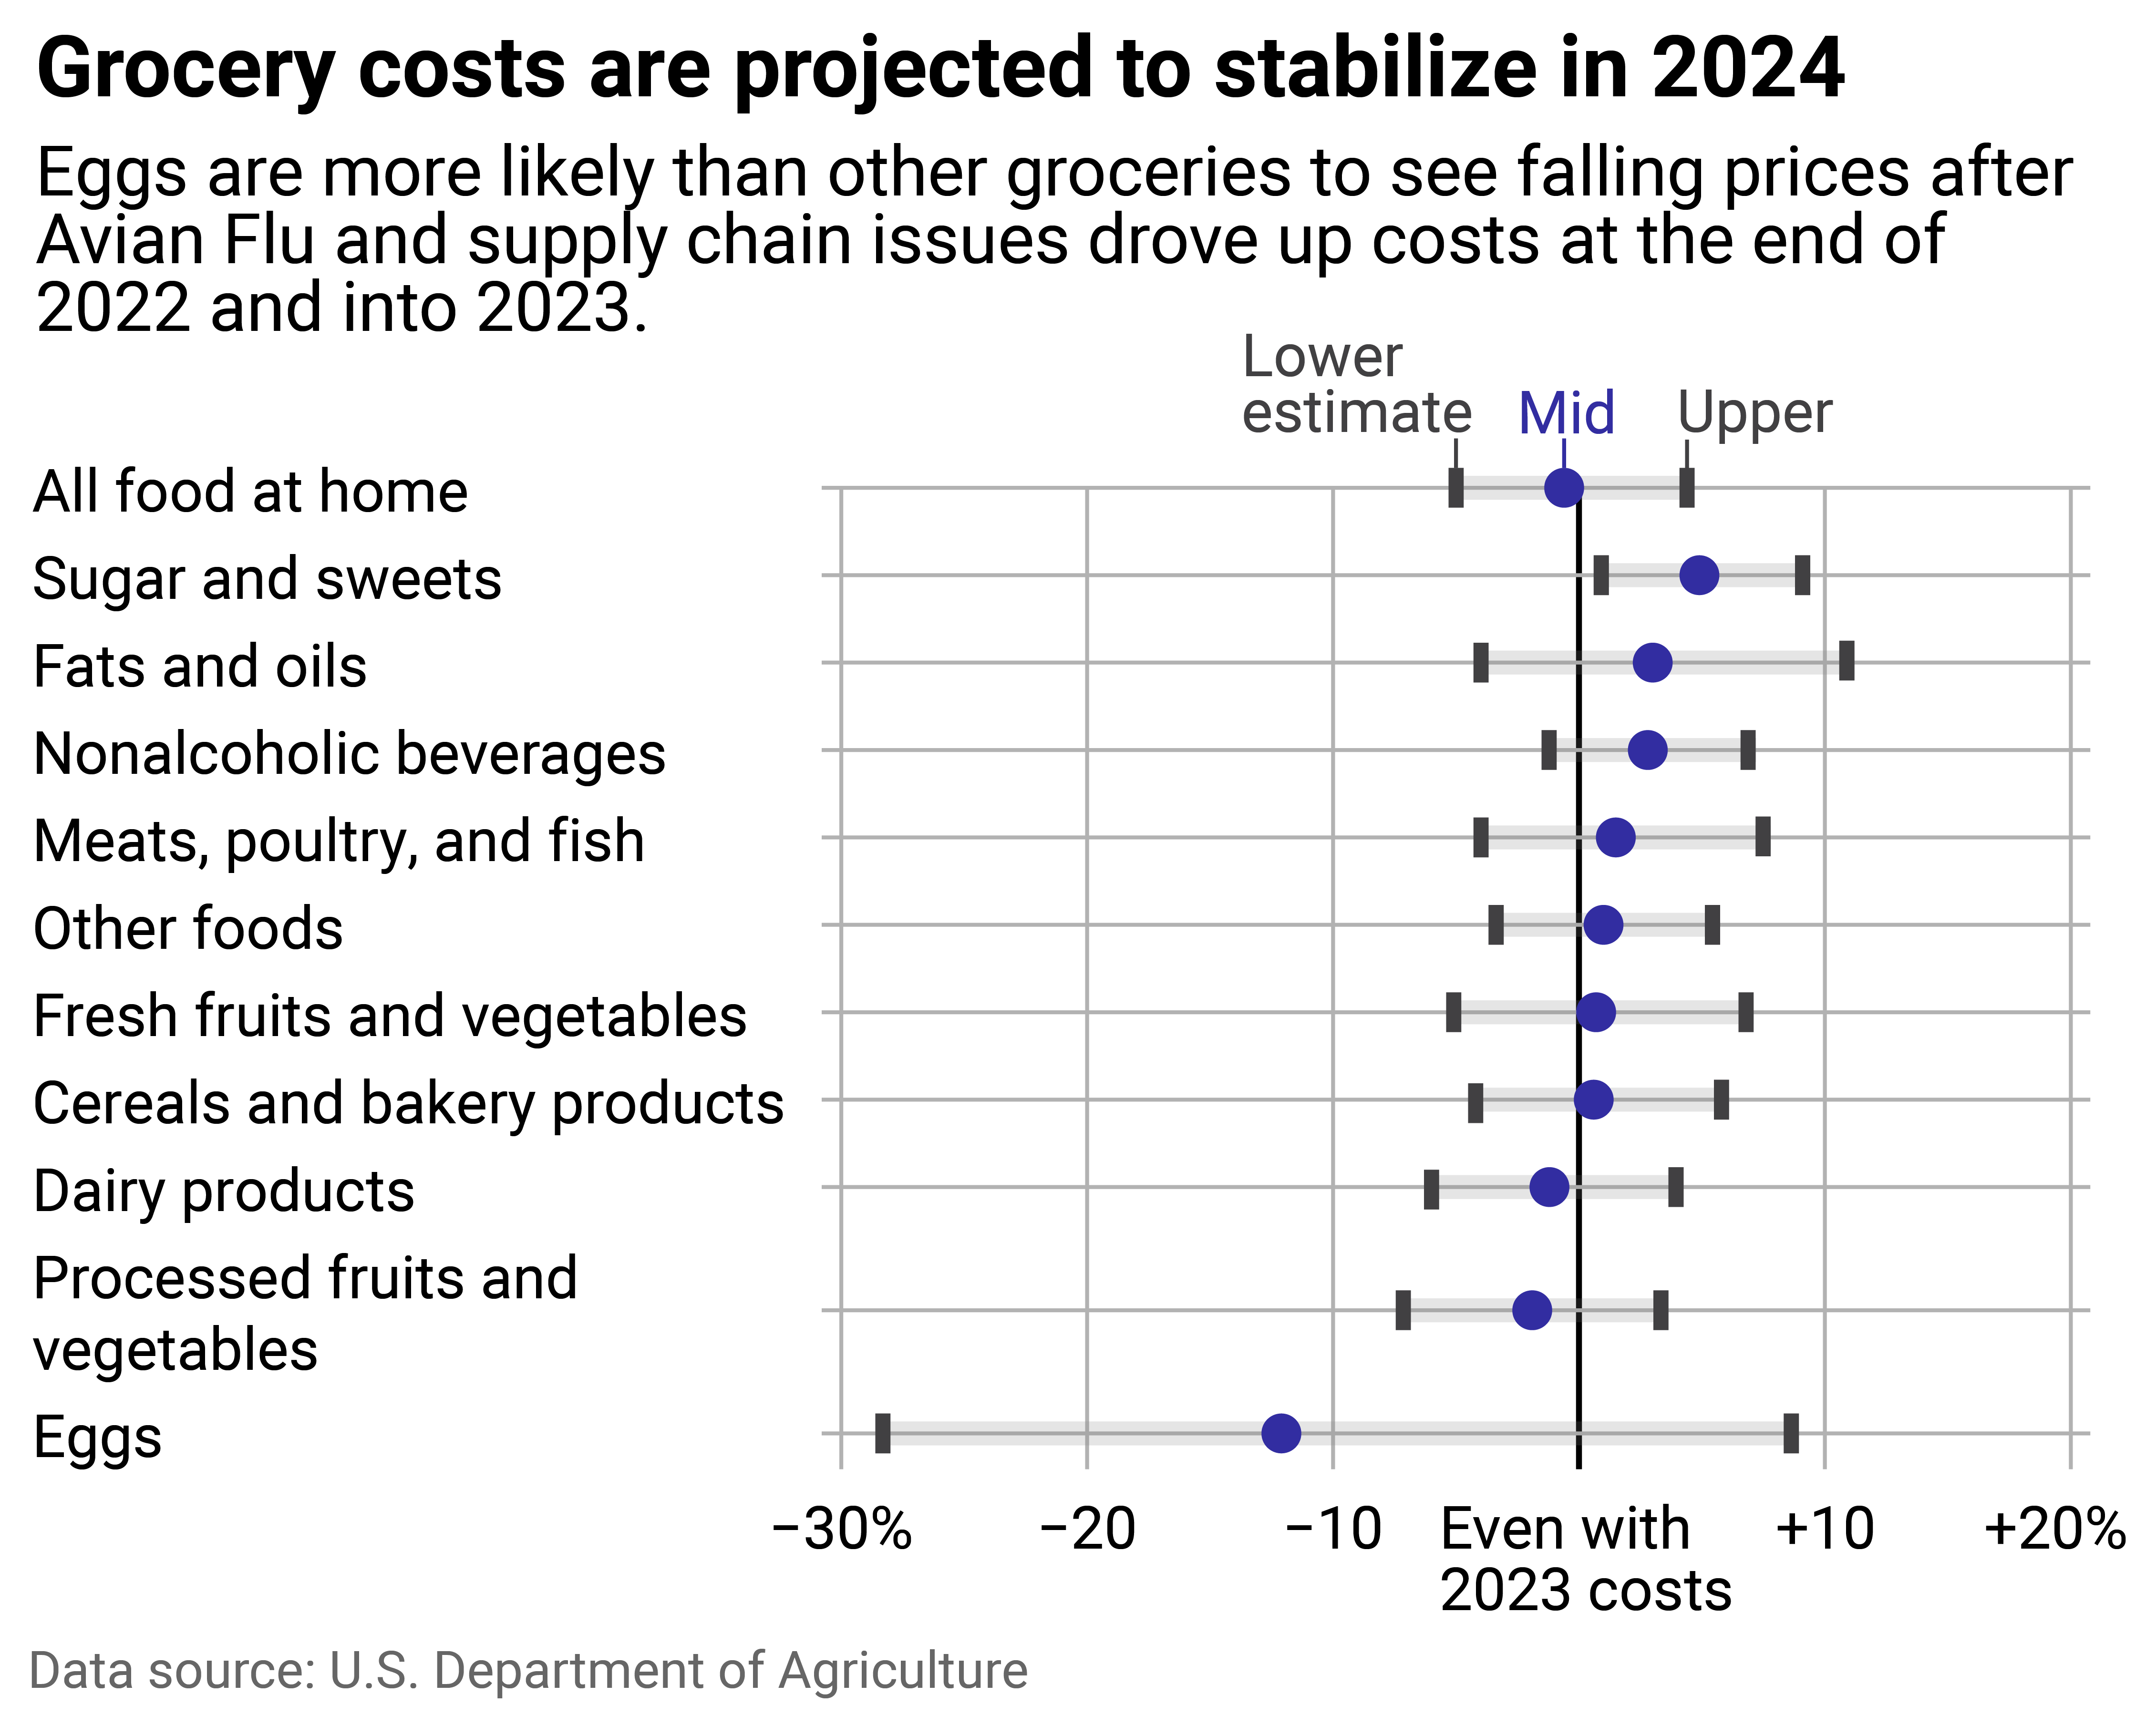 Dot plot showing grocery costs are projected to stabilize in 2024. Eggs are more likely than other groceries to see falling prices after avian flu and supply chain issues drove up costs at the end of 2022 and into 2023.